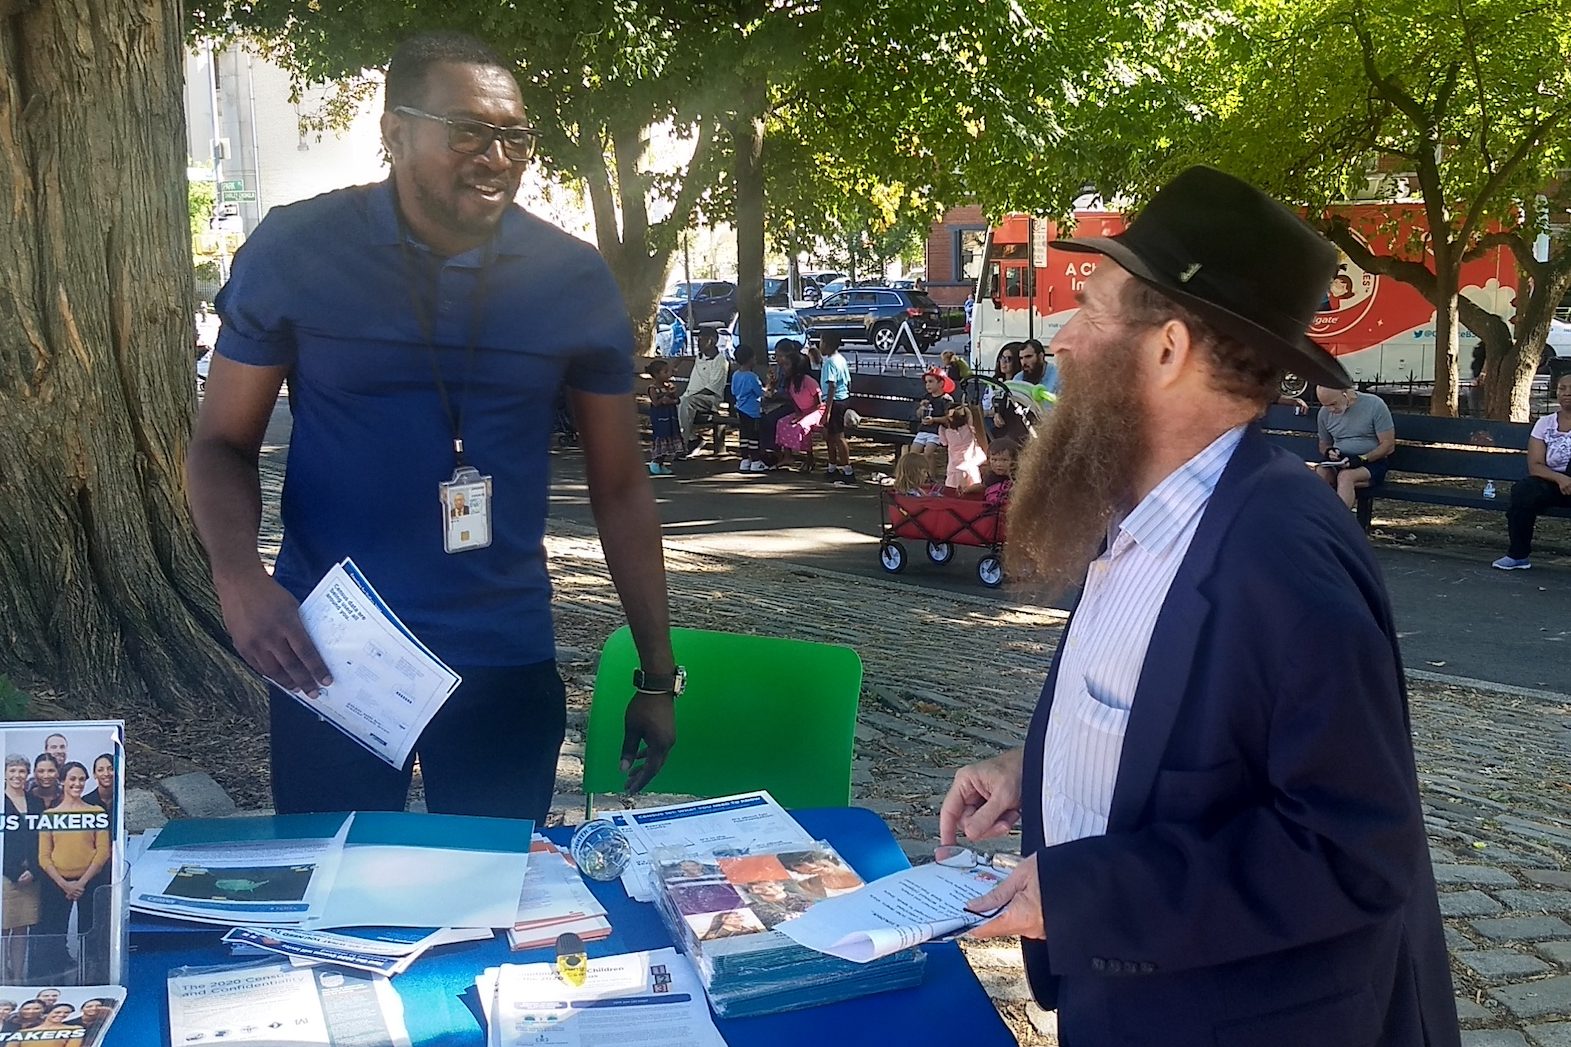 Rabbi Eli Cohen (right), the executive director of the Crown Heights Community Center, talks with a census volunteer at the #OneCrownHeights festival in Brooklyn, New York on Sunday, September 15, 2019. (Ben Sales)